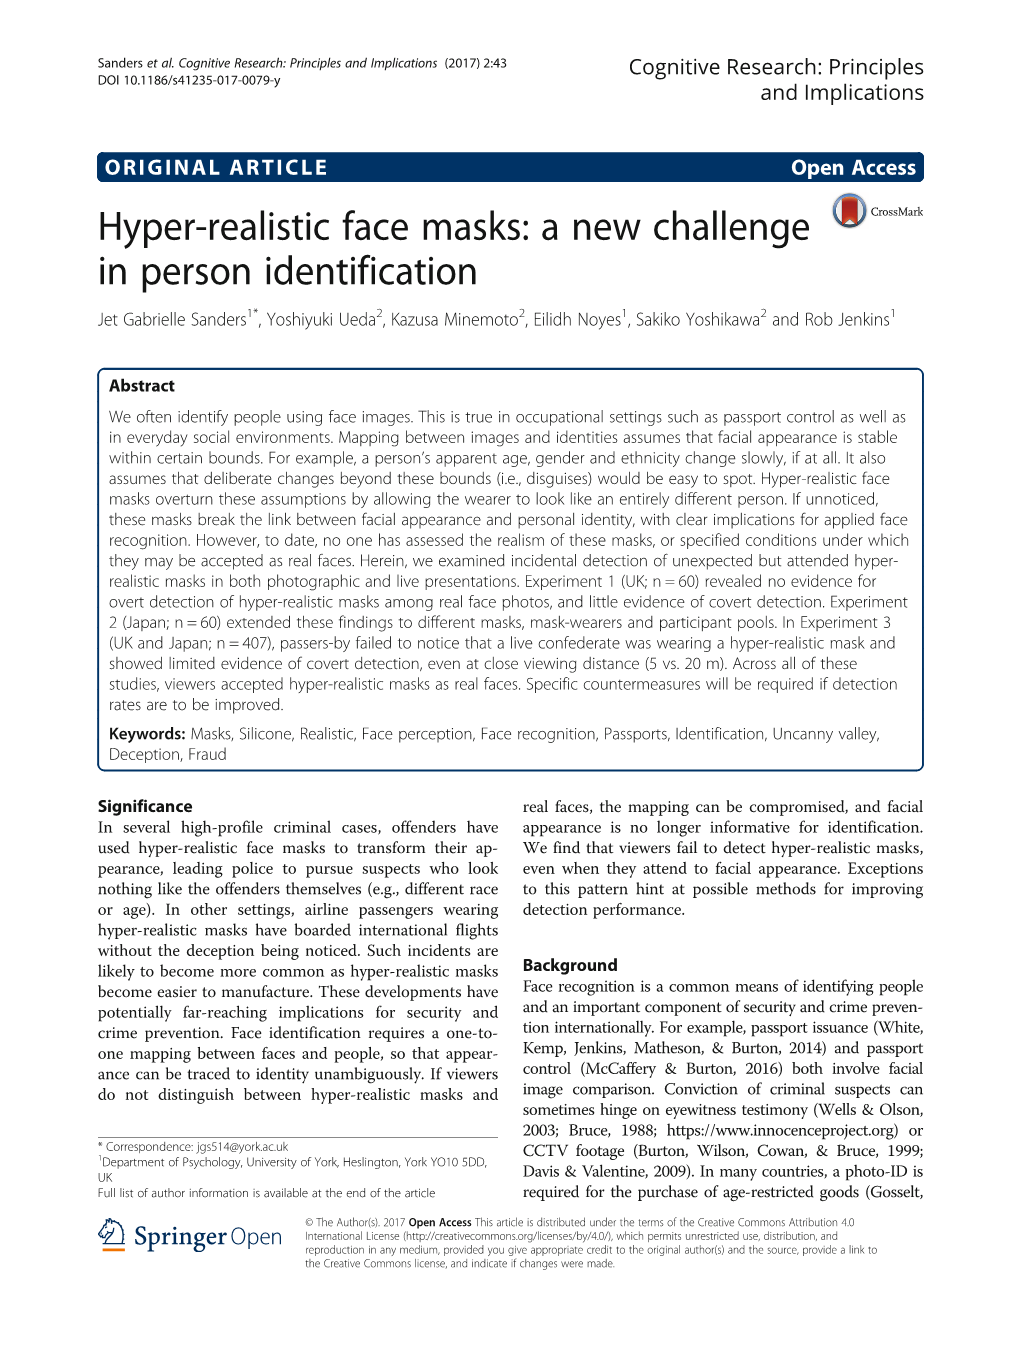 Hyper-Realistic Face Masks: a New Challenge in Person Identification